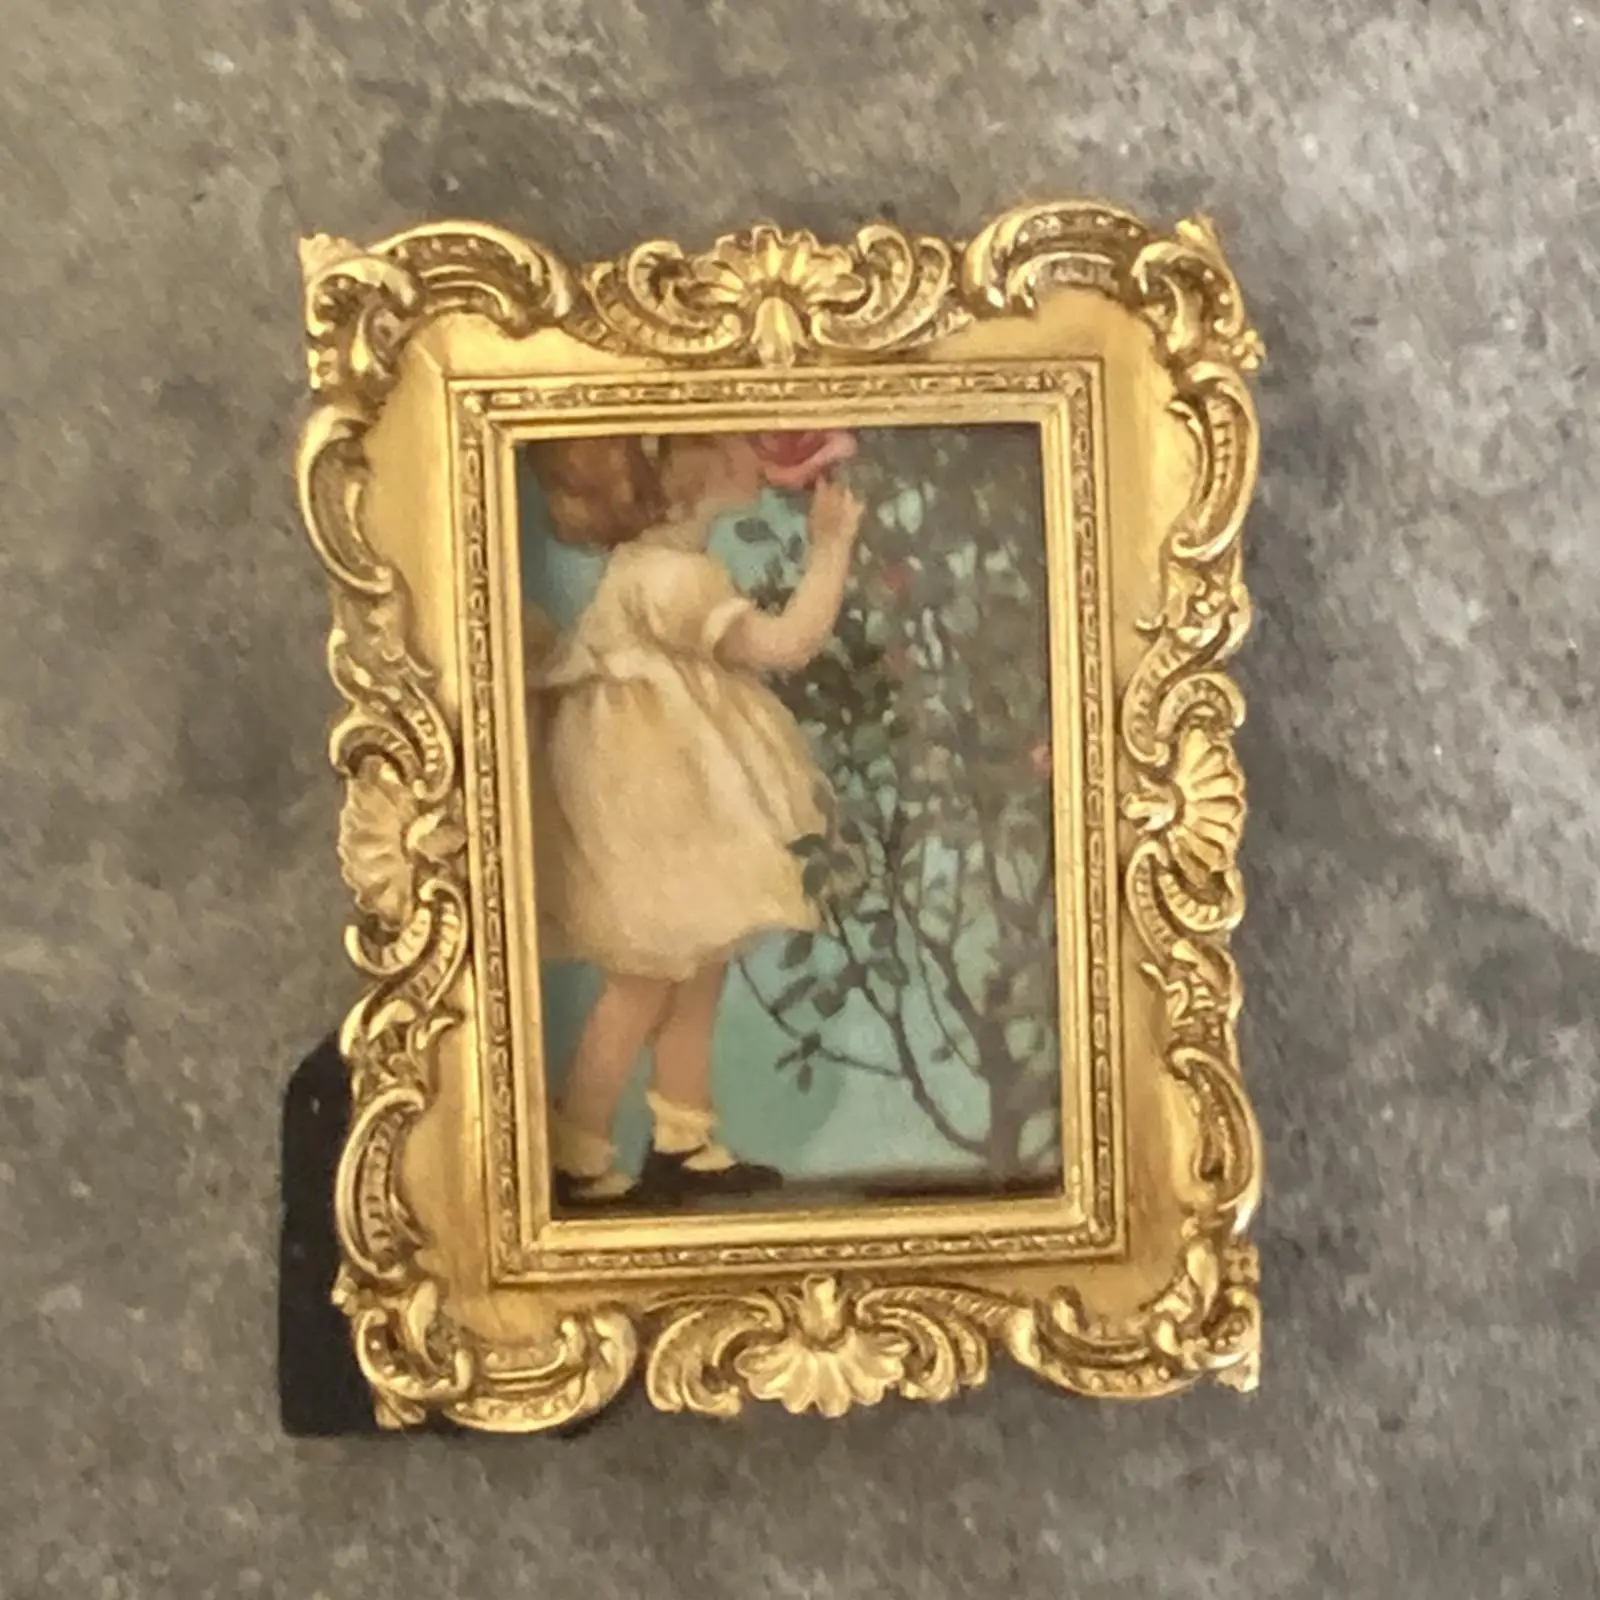 Antique Photo Frame Resin Golden Carved Photo Gallery Art Ornate Desktop and Wall Hanging for Retro Home Decor Gift Ideas